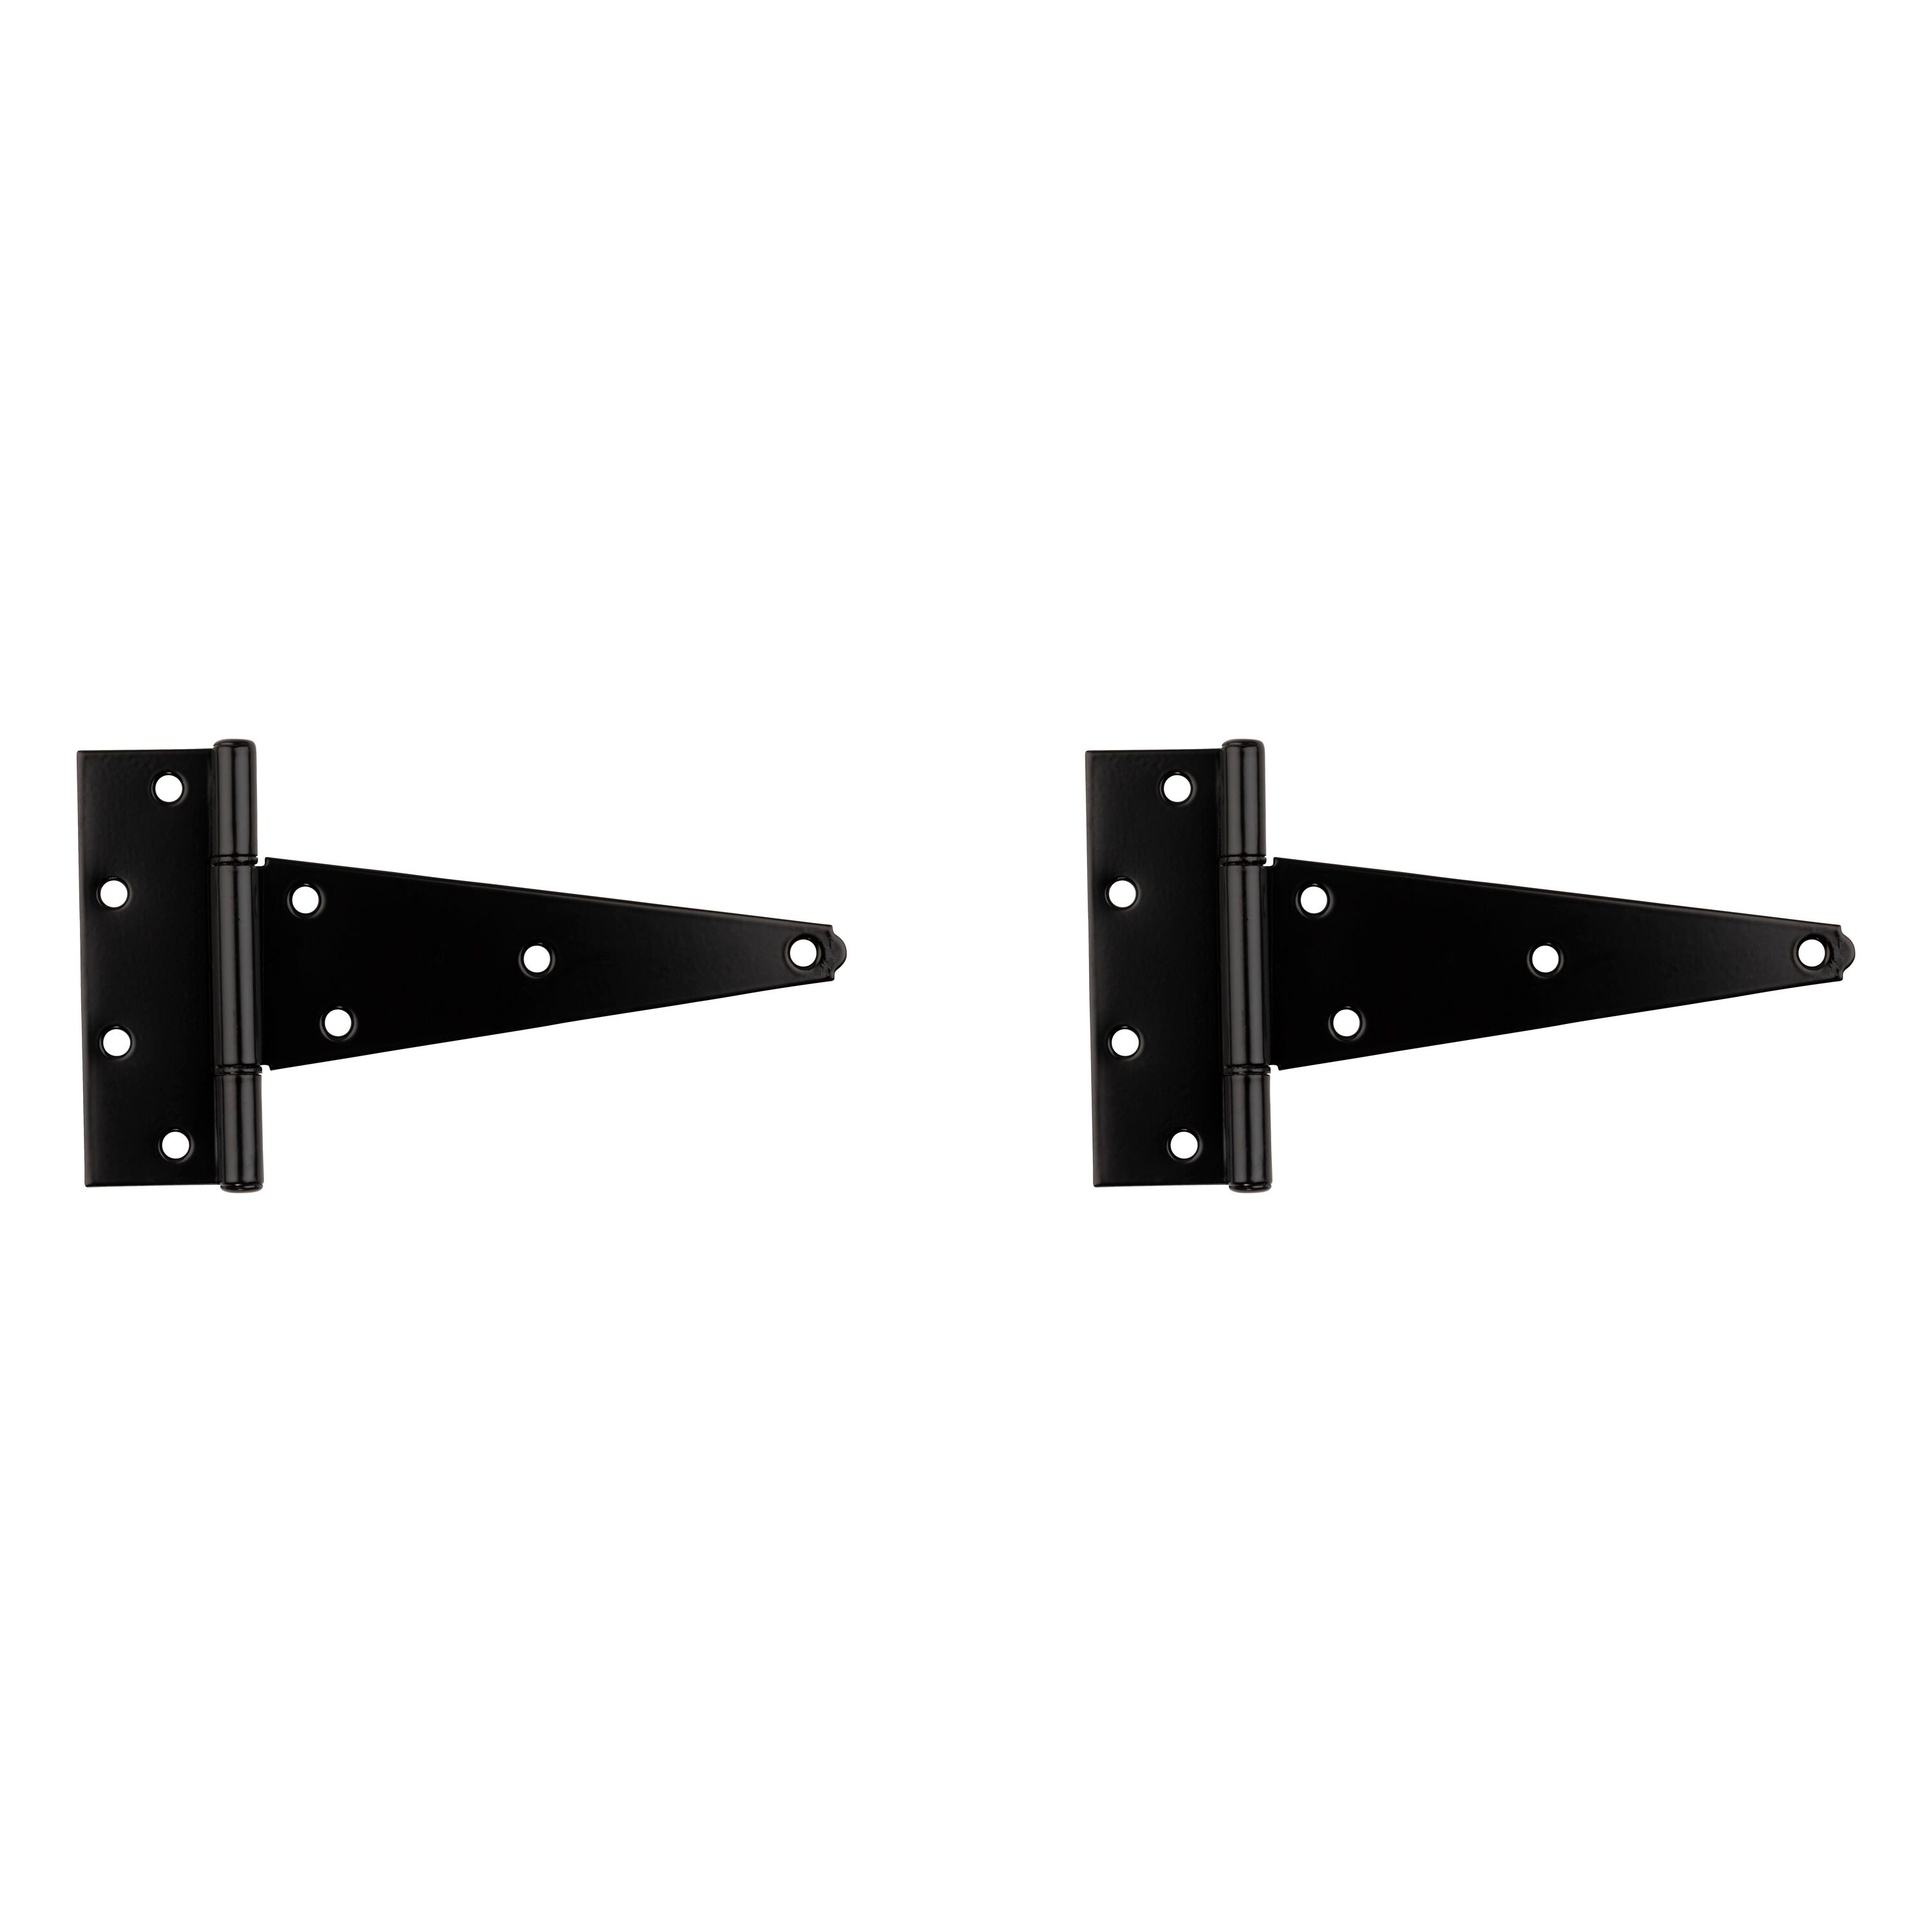 2 pack National Hardware N129-080 V286 Extra Heavy T Hinges in Zinc plated